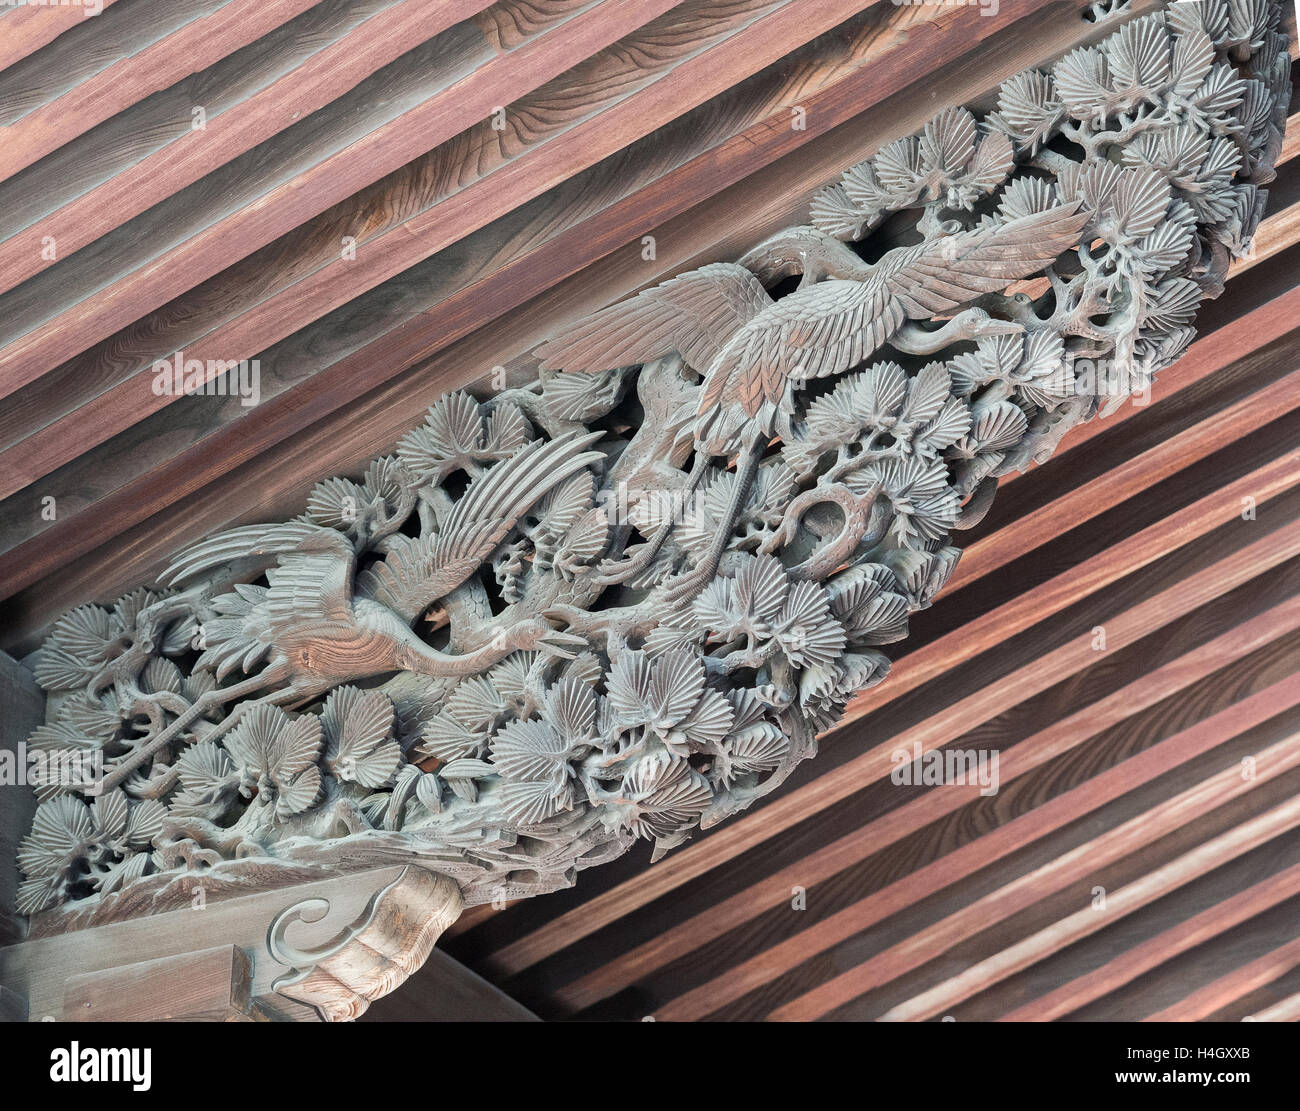 Detail of elaborate wood carving at Chion-in Buddhist temple. Stock Photo